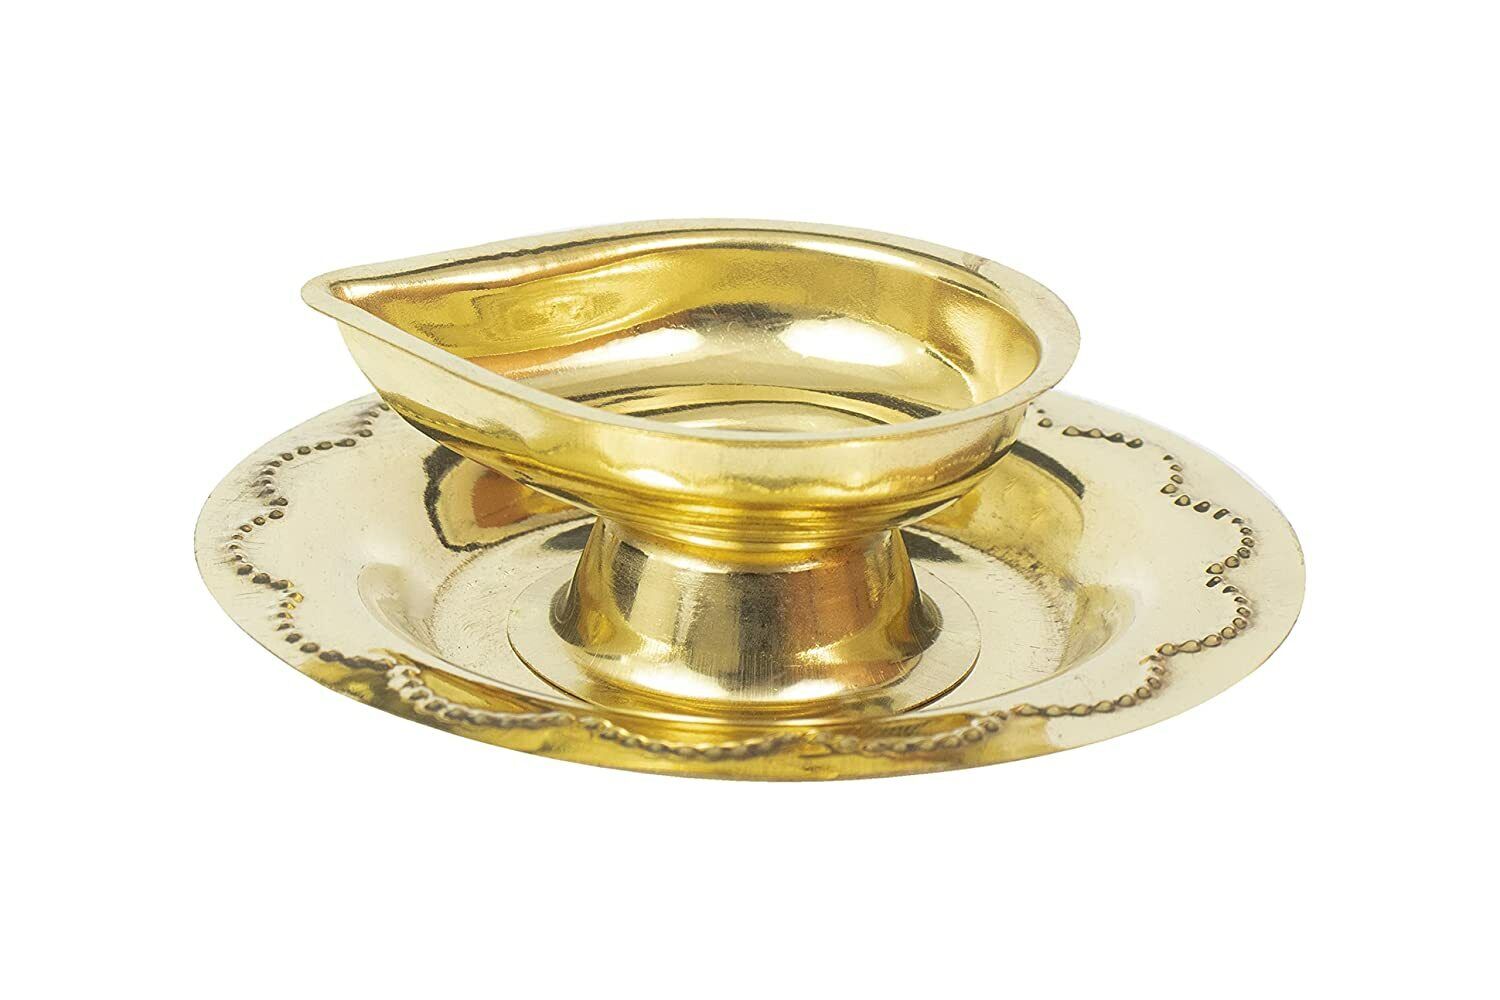 Indian Traditional Handcrafted Brass Diya Oil Lamp With Plate For Puja & Temple 